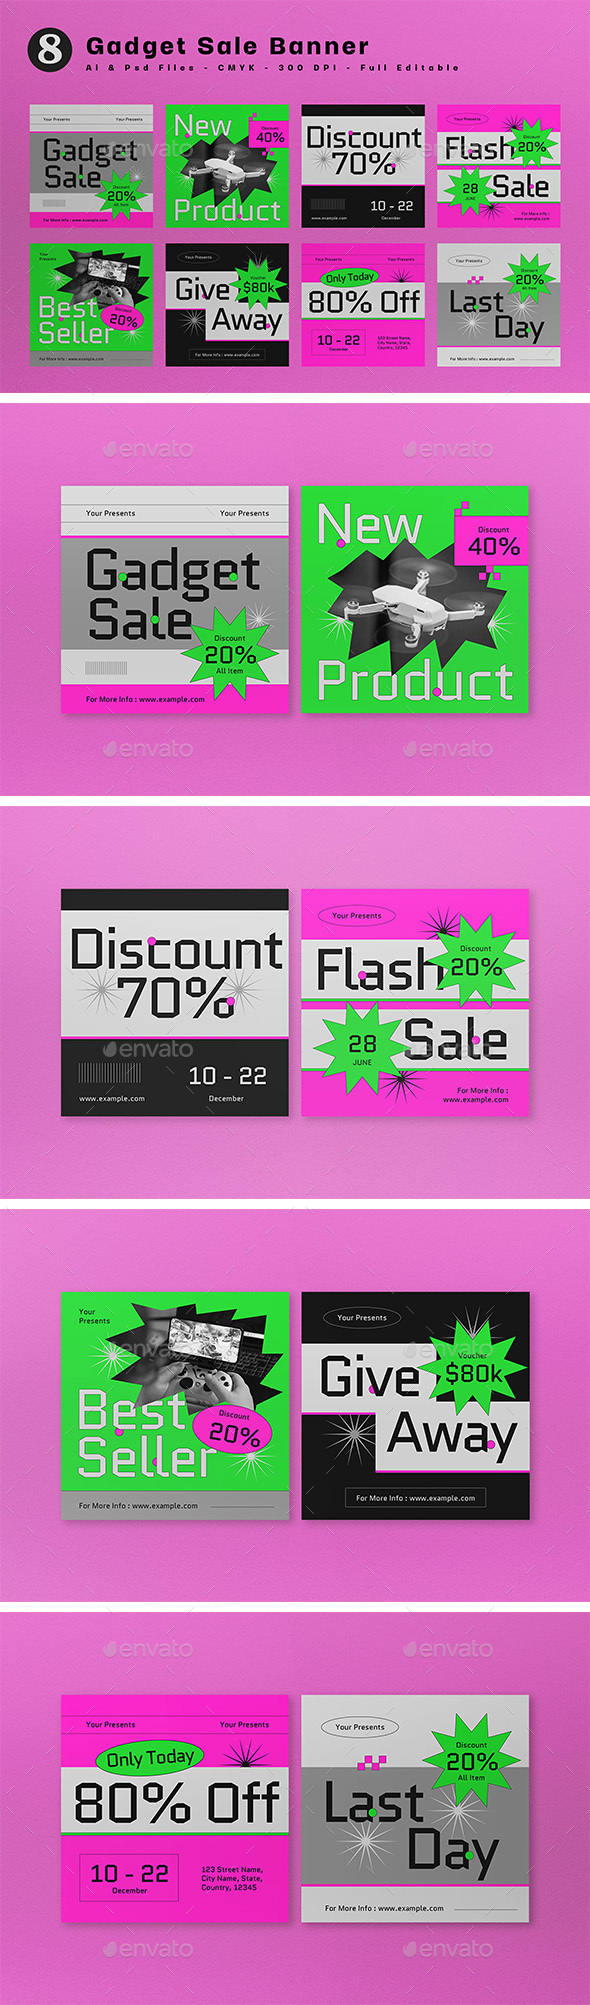 Green Abstract Shape Gadget Sale Square Banner